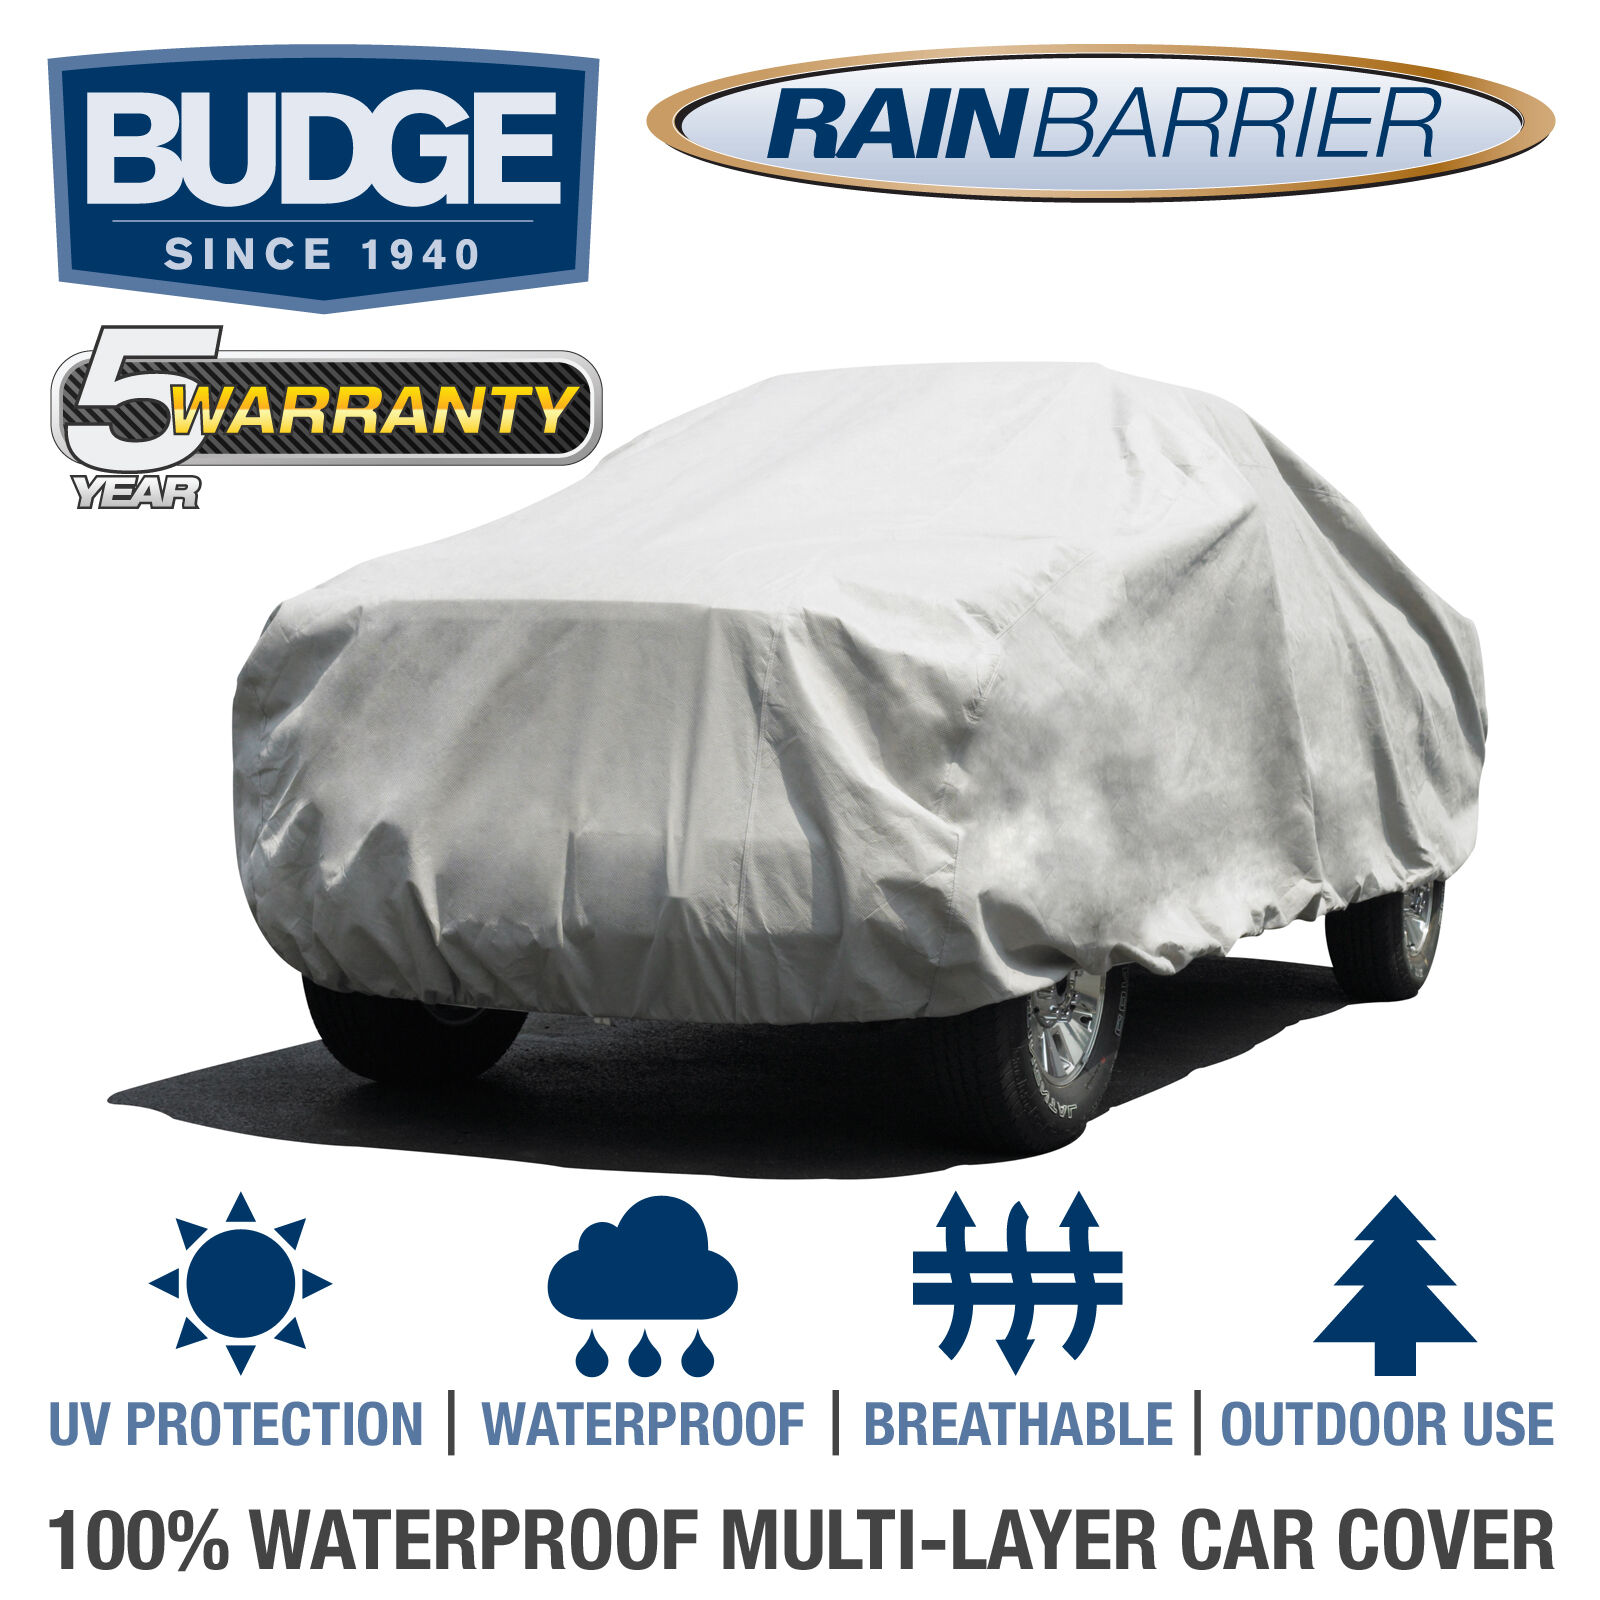 Budge Rain Barrier Truck Cover Fits Long Bed Standard Cab up to 20\' Long